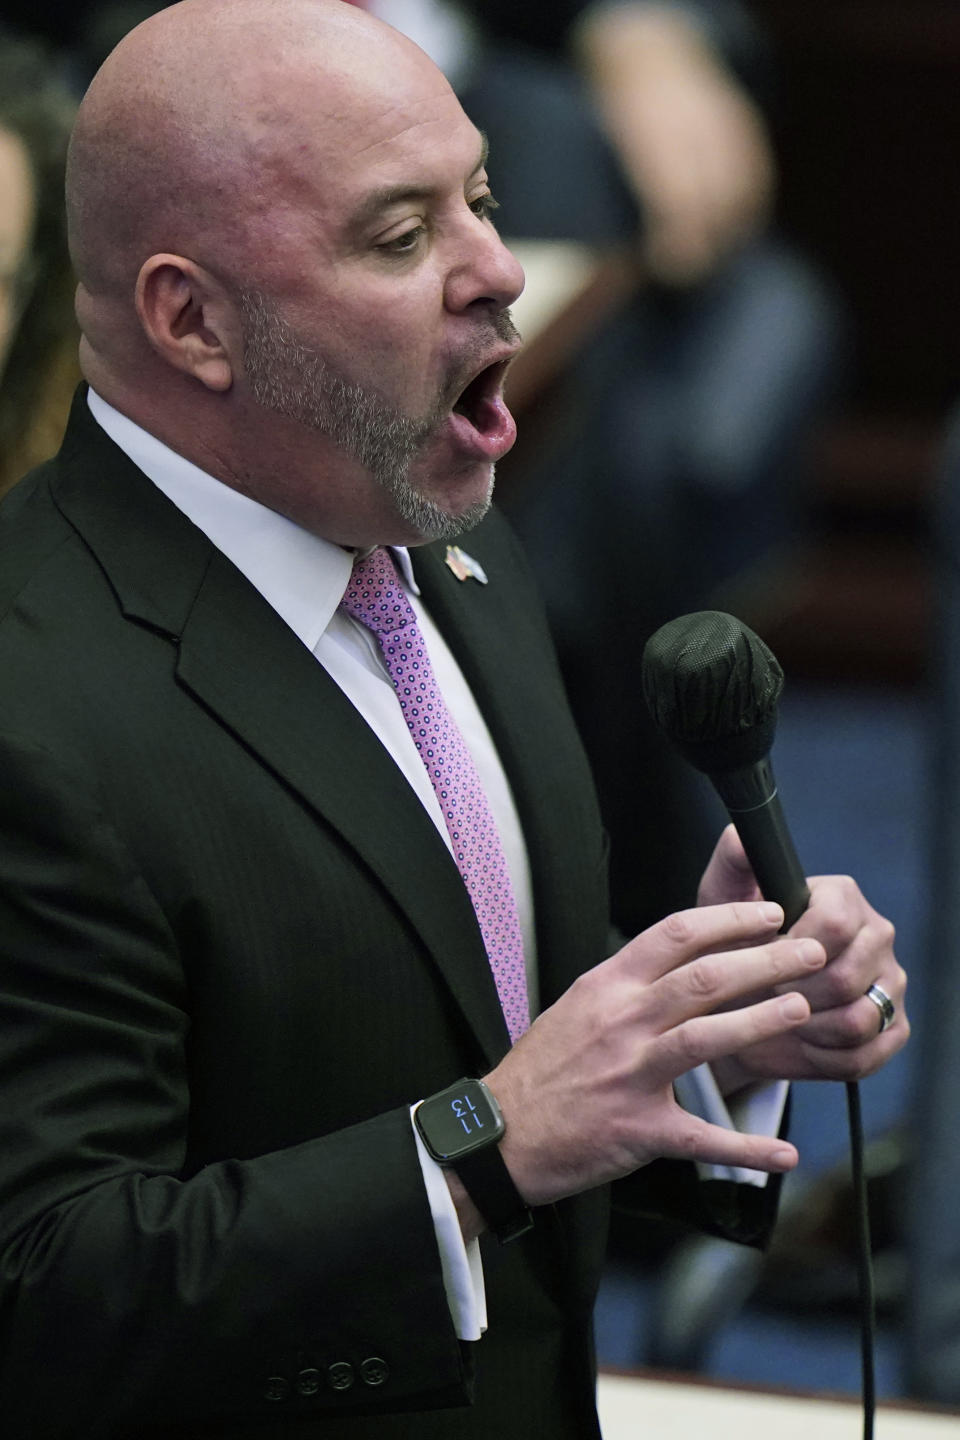 Florida Rep. Blaise Ingoglia gestures as he speaks during a legislative session, Wednesday, April 28, 2021, at the Capitol in Tallahassee, Fla. (AP Photo/Wilfredo Lee)